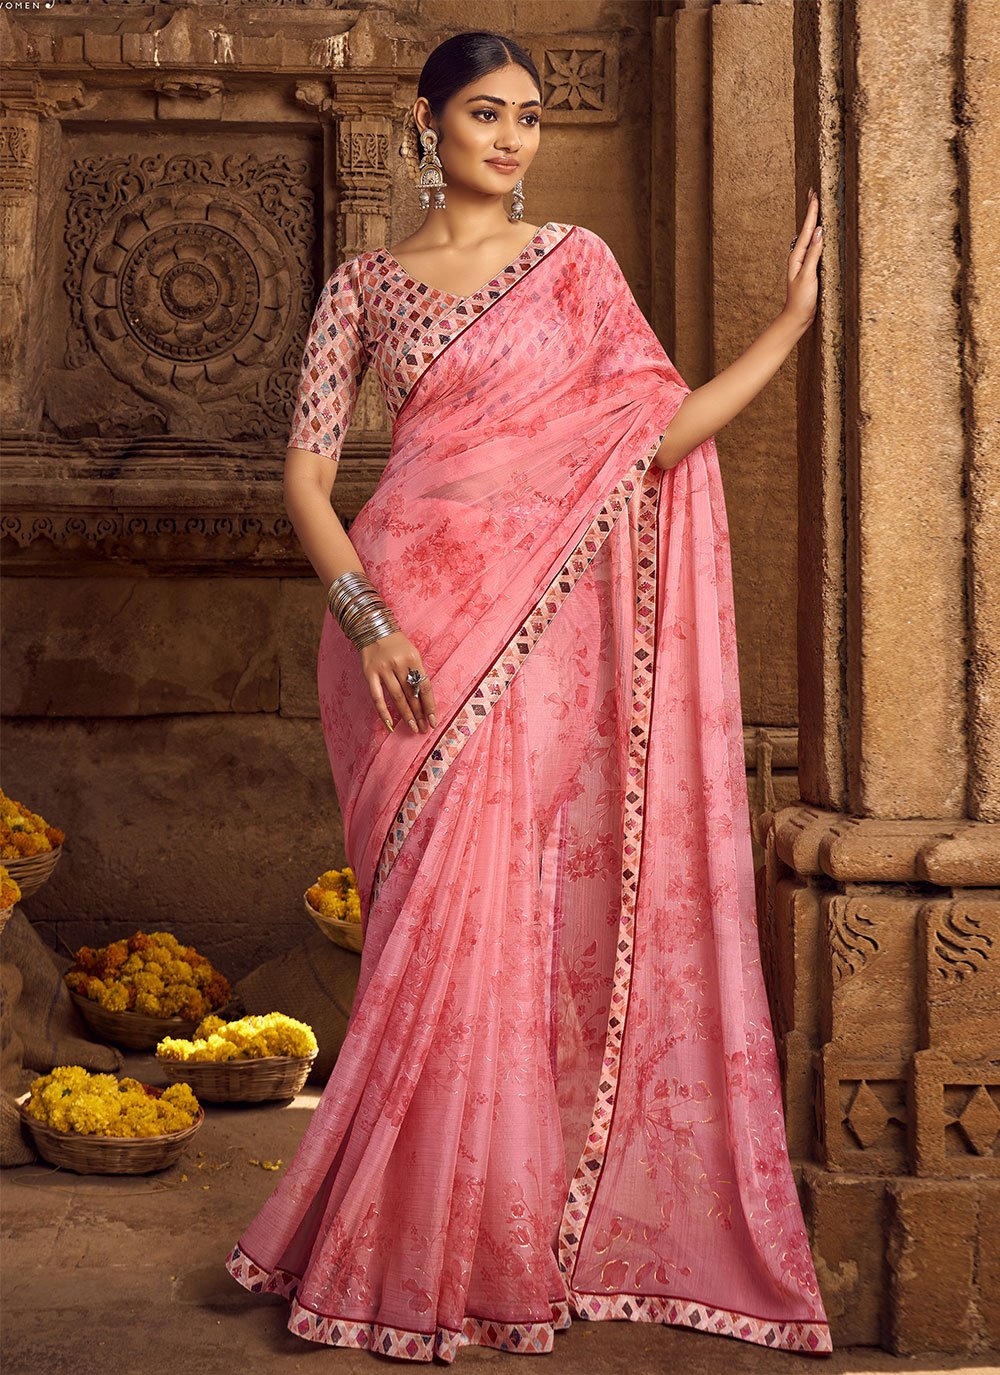 Dazzeling Printed Plain Cotton Saree With Zari Border, 6.3 m (with blouse  piece)